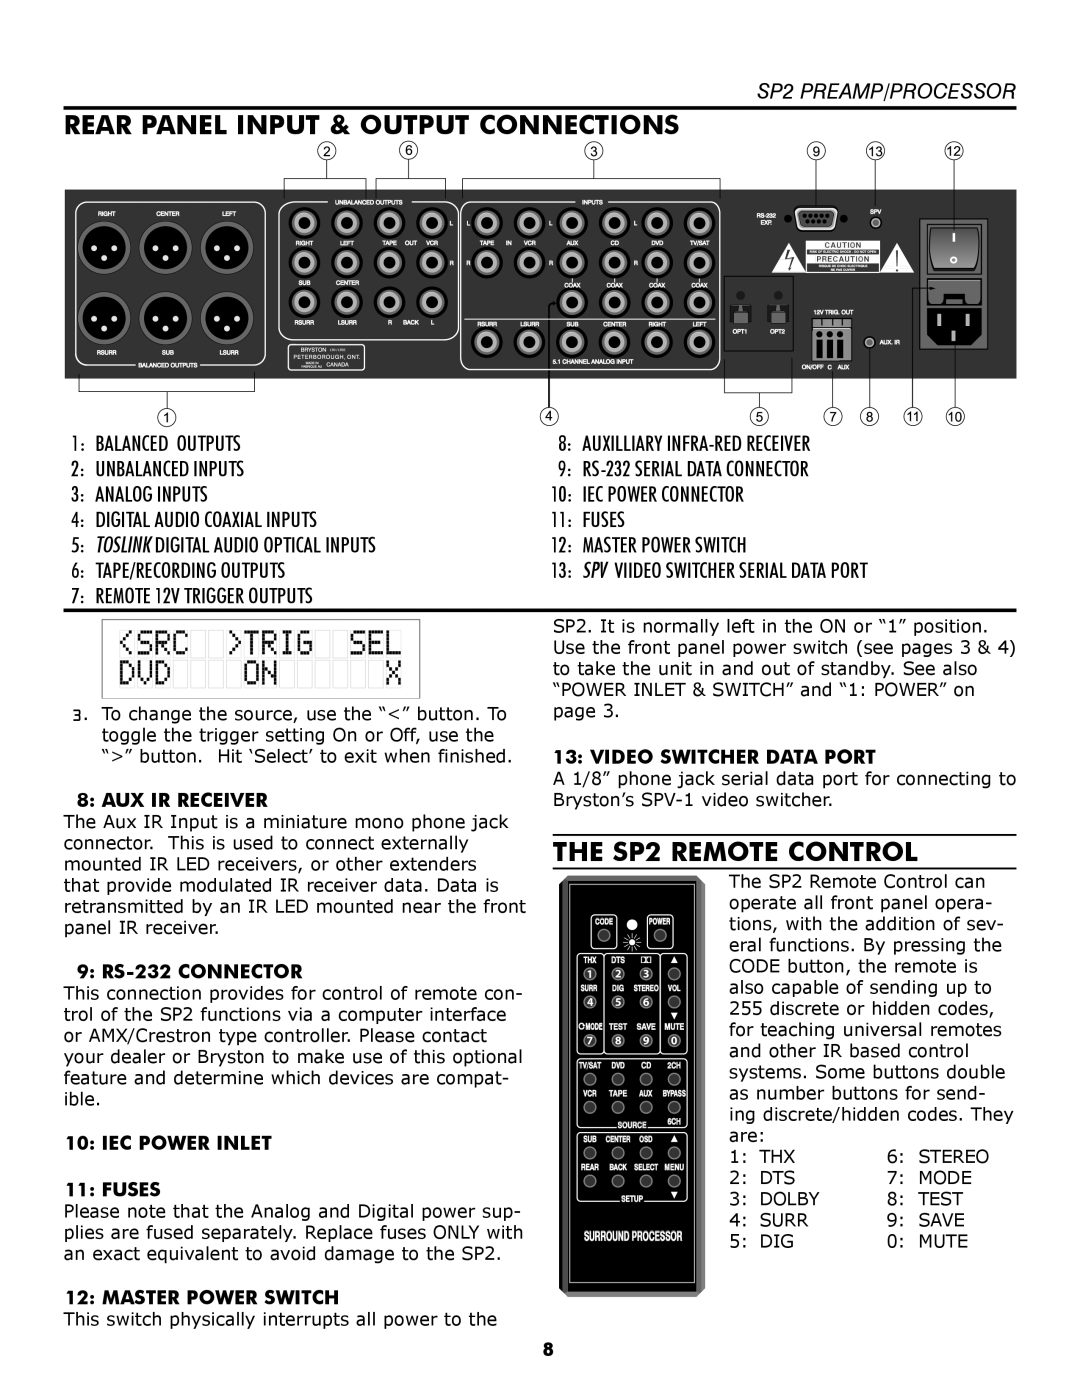 Bryston owner manual Rear Panel Input & Output Connections, THE SP2 REMOTE CONTROL, SP2 PREAMP/PROCESSOR 